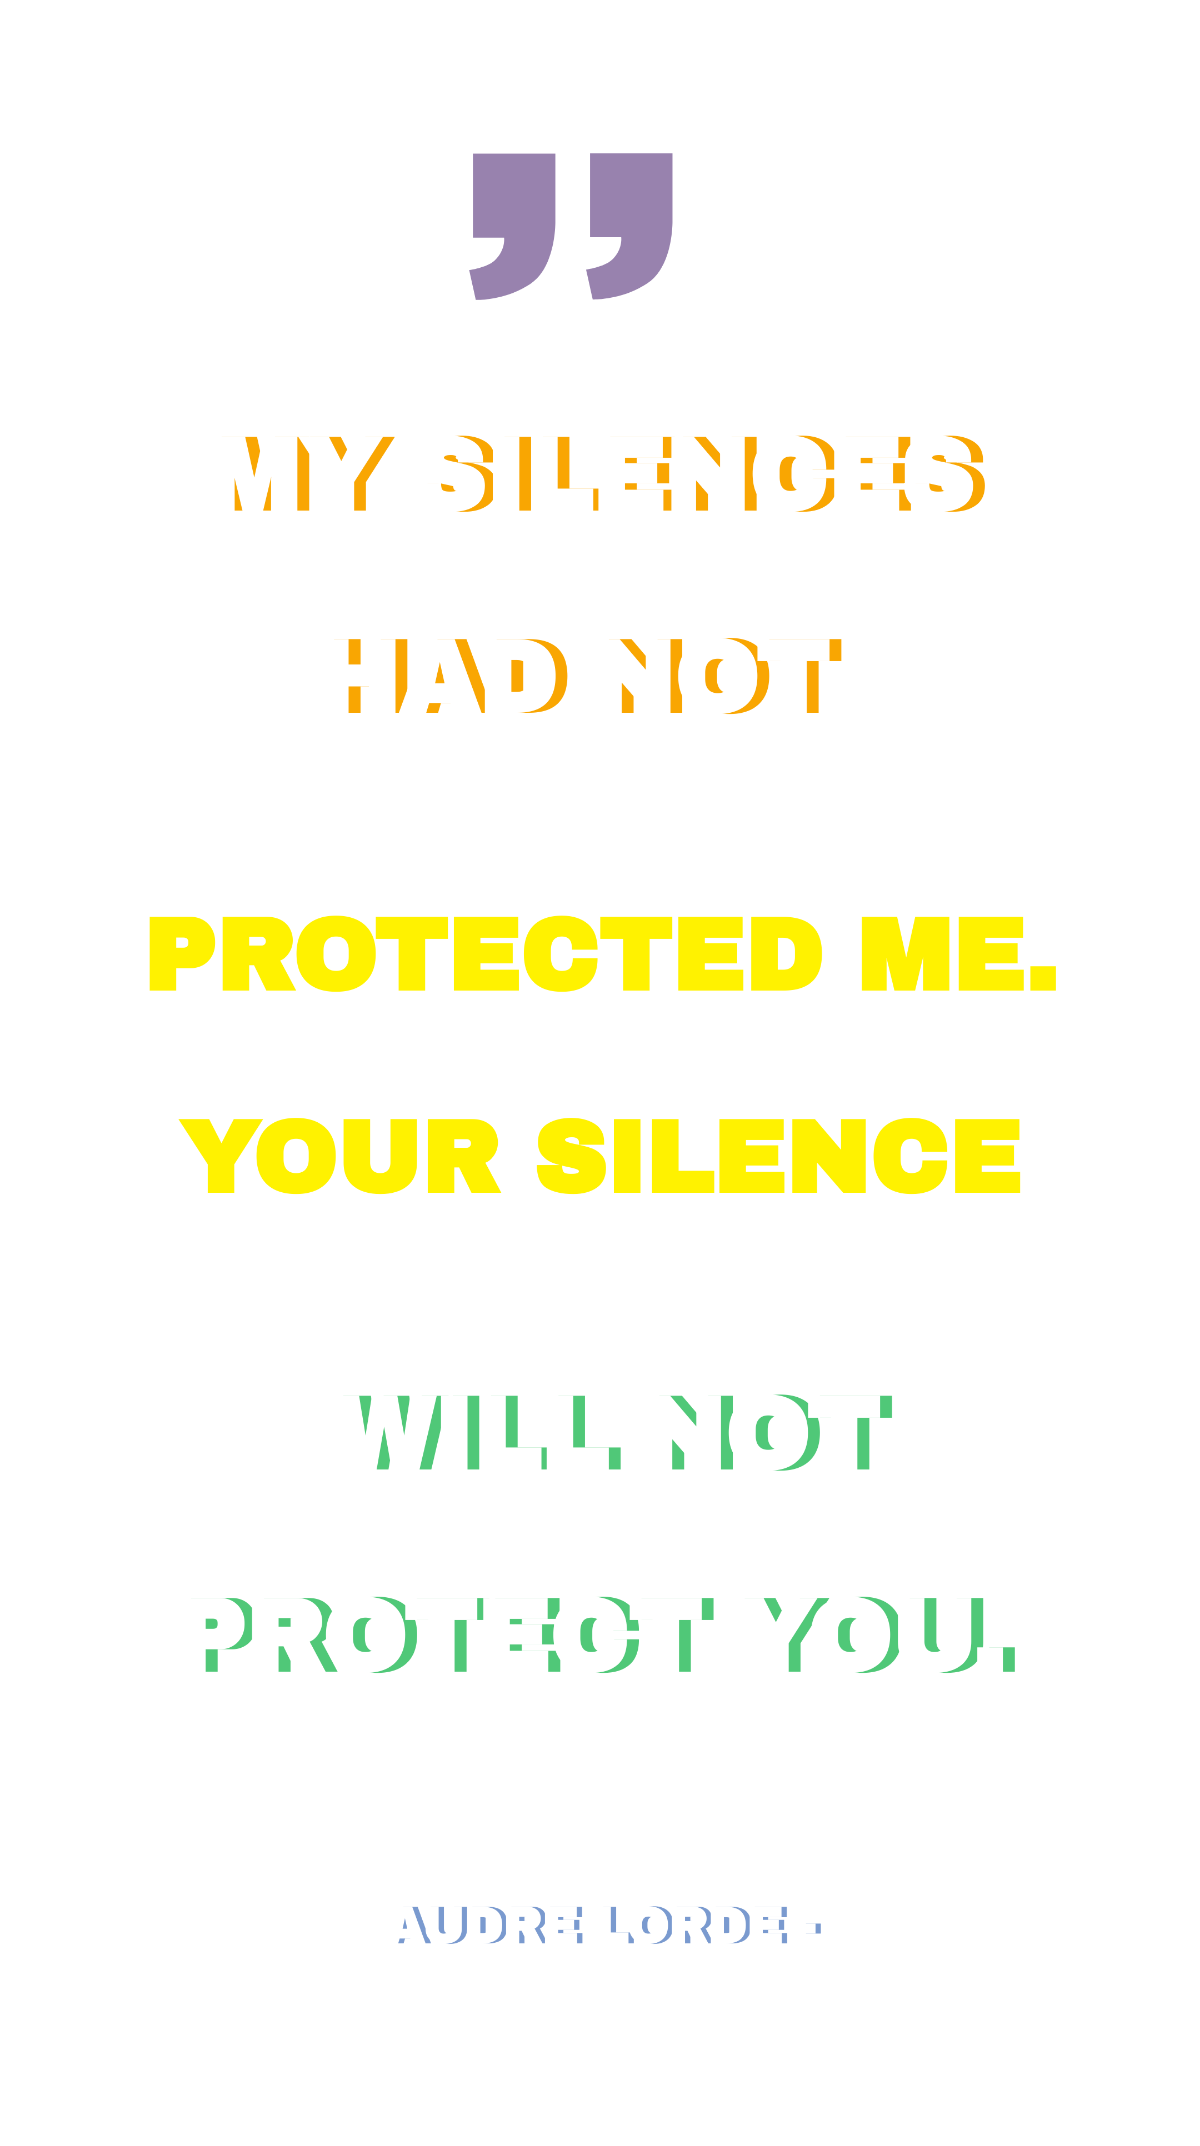 Audre Lorde - My silences had not protected me. Your silence will not protect you. Template